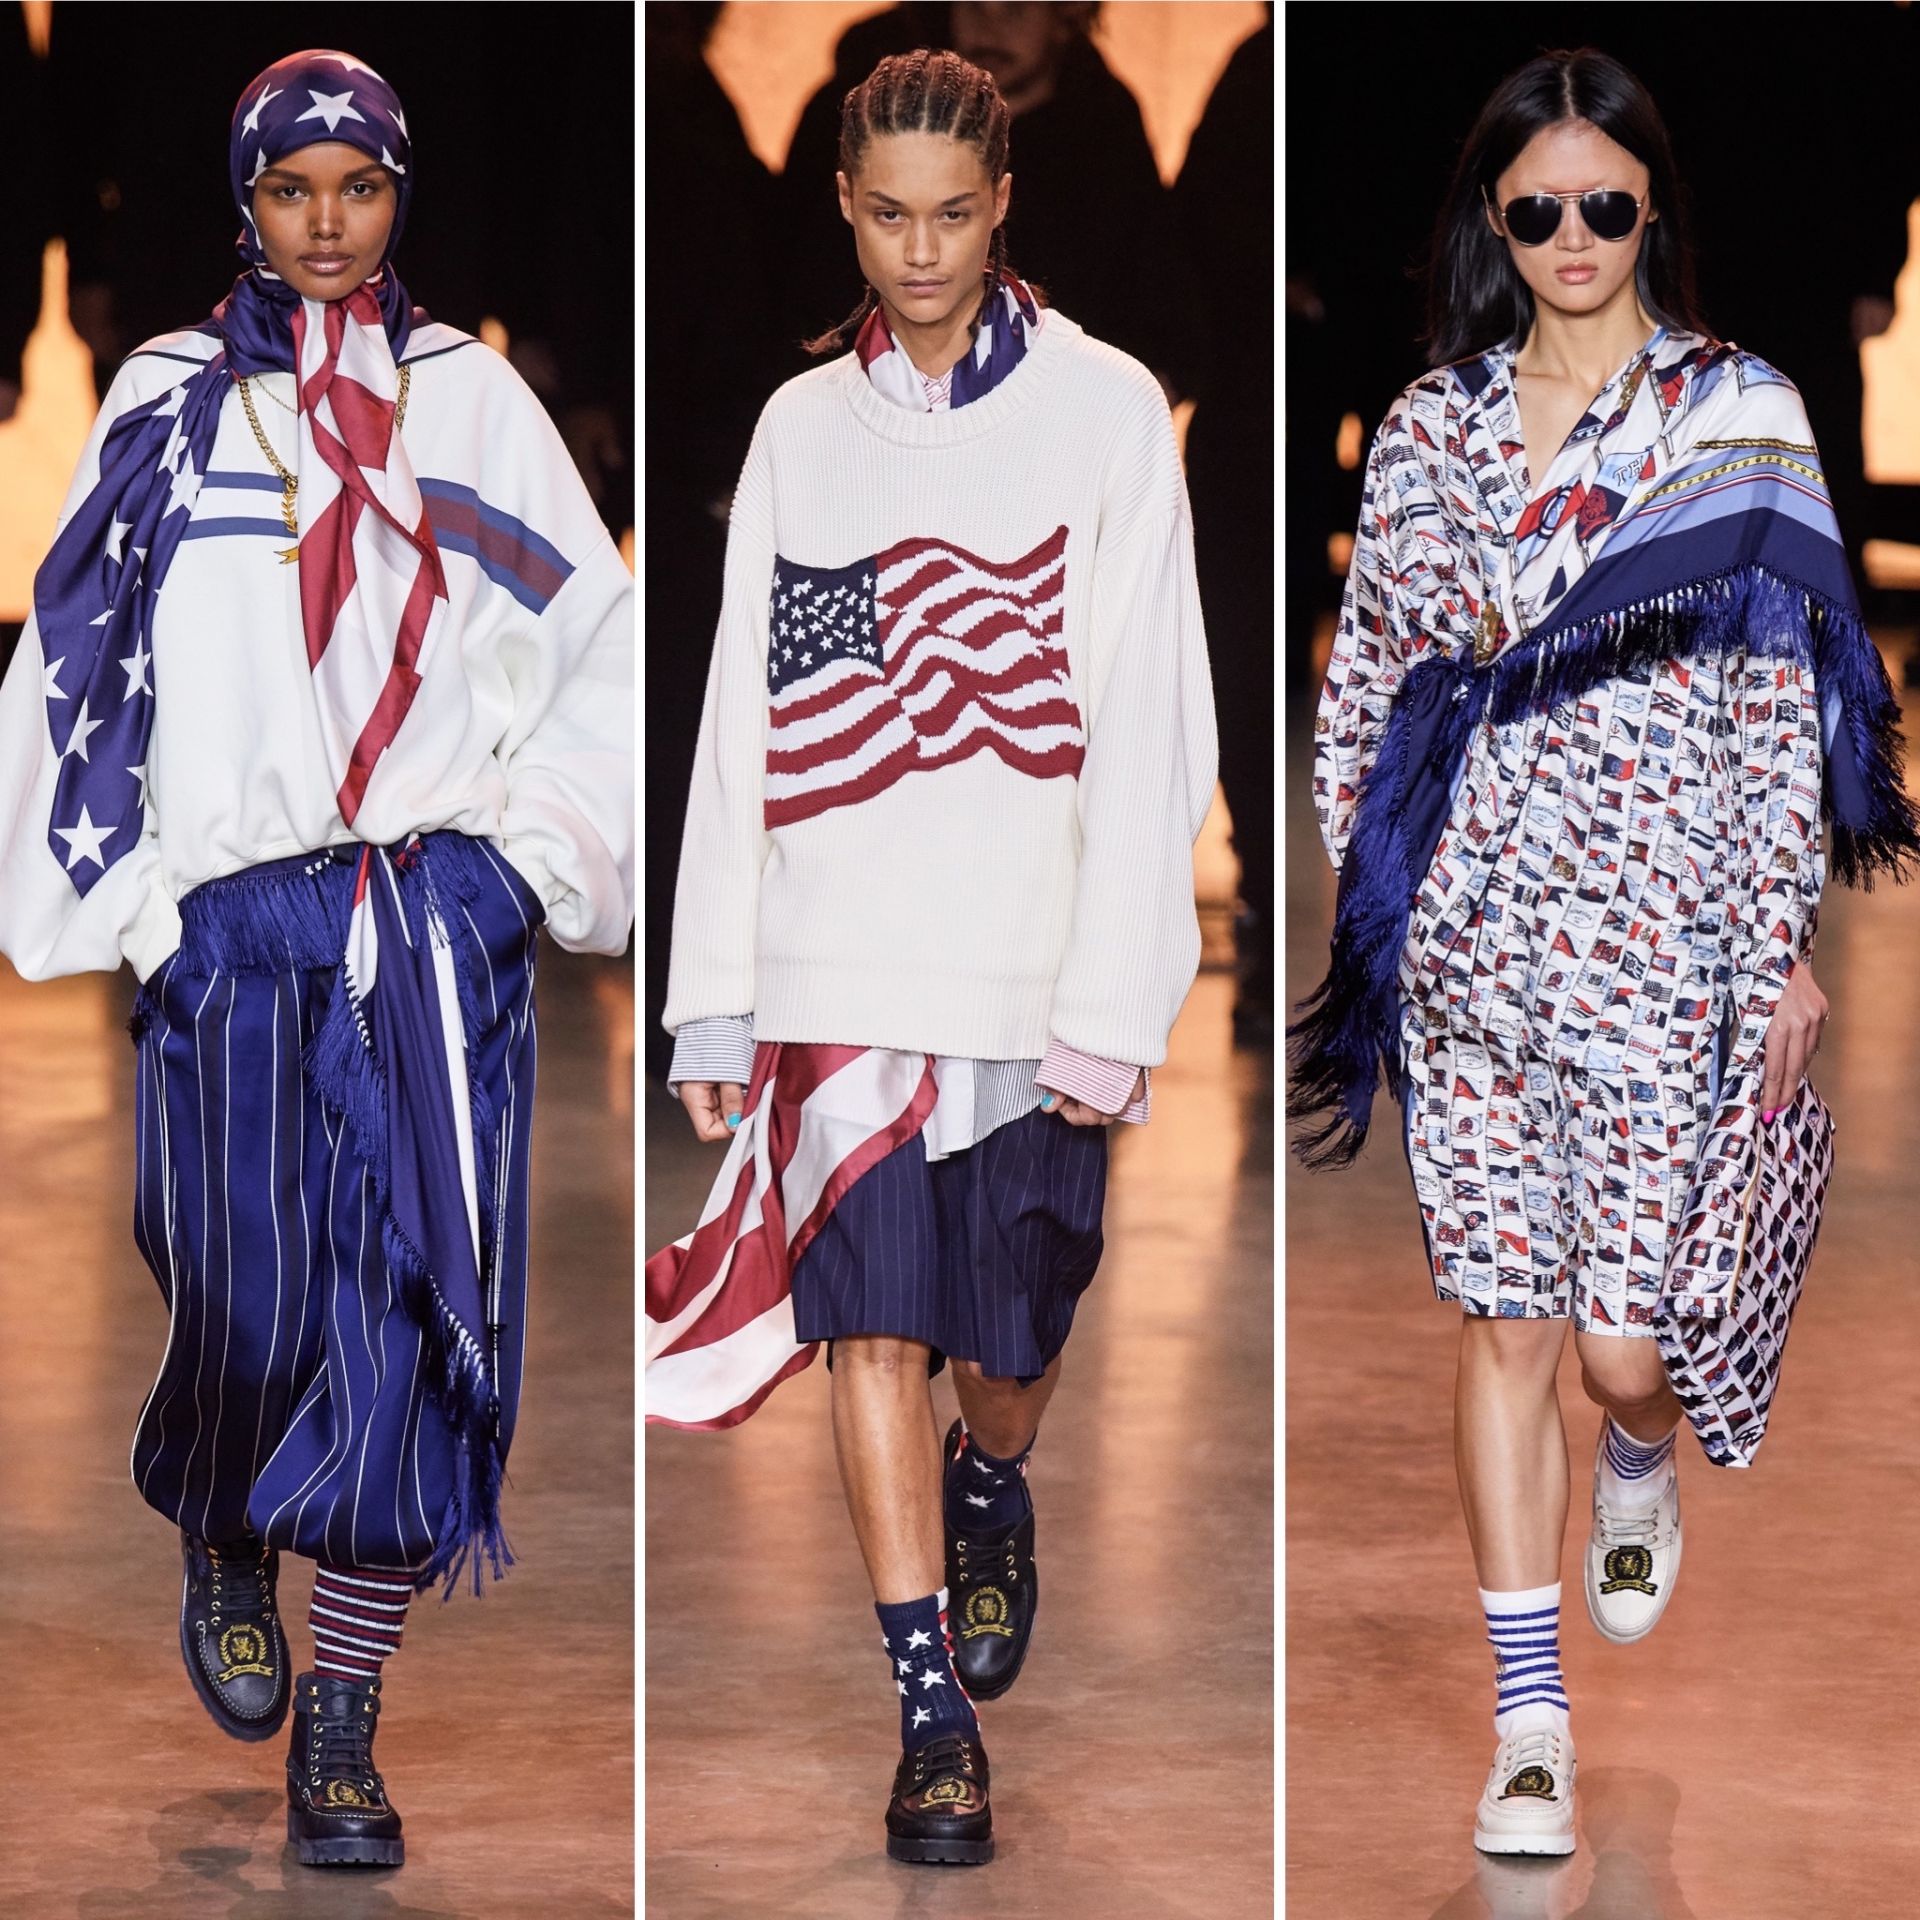 Patriotic Sporty Chic at the Tommy Hilfiger SS 2020 Show | World ...